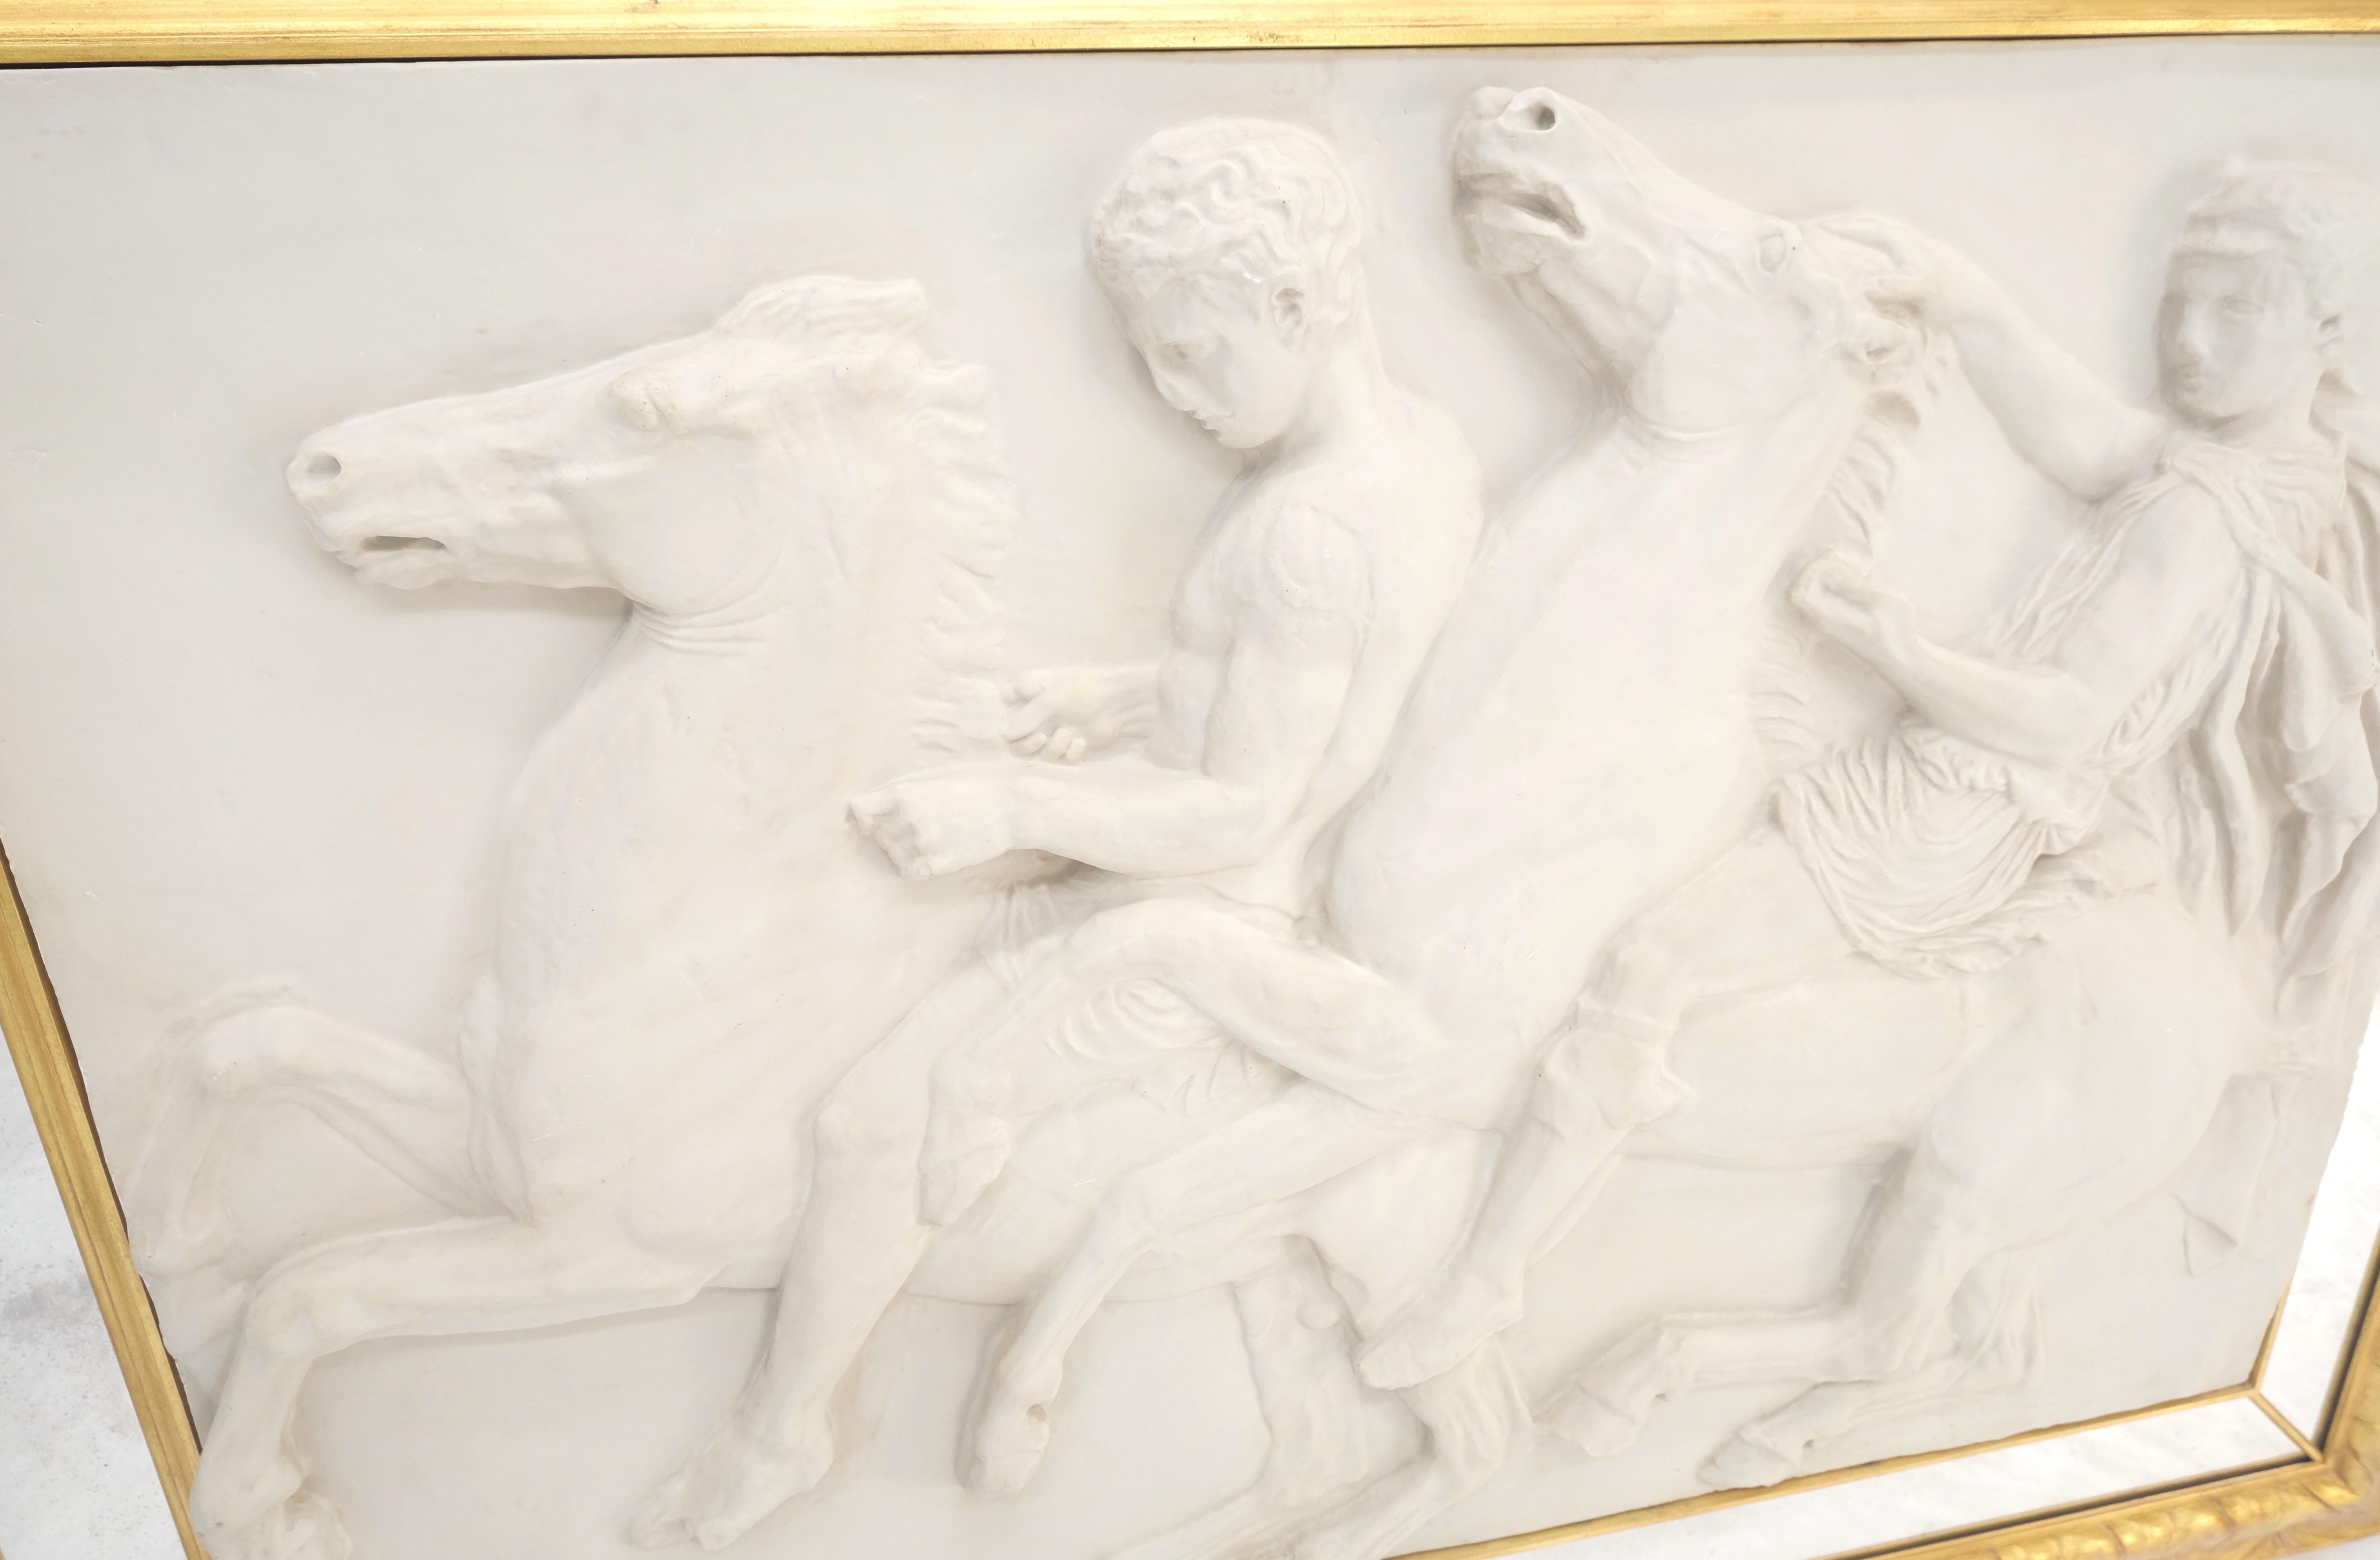 20th Century Large Carved Alabaster Horse Riding Scene Wall Plaque In Gold Leaf Mirror Frame